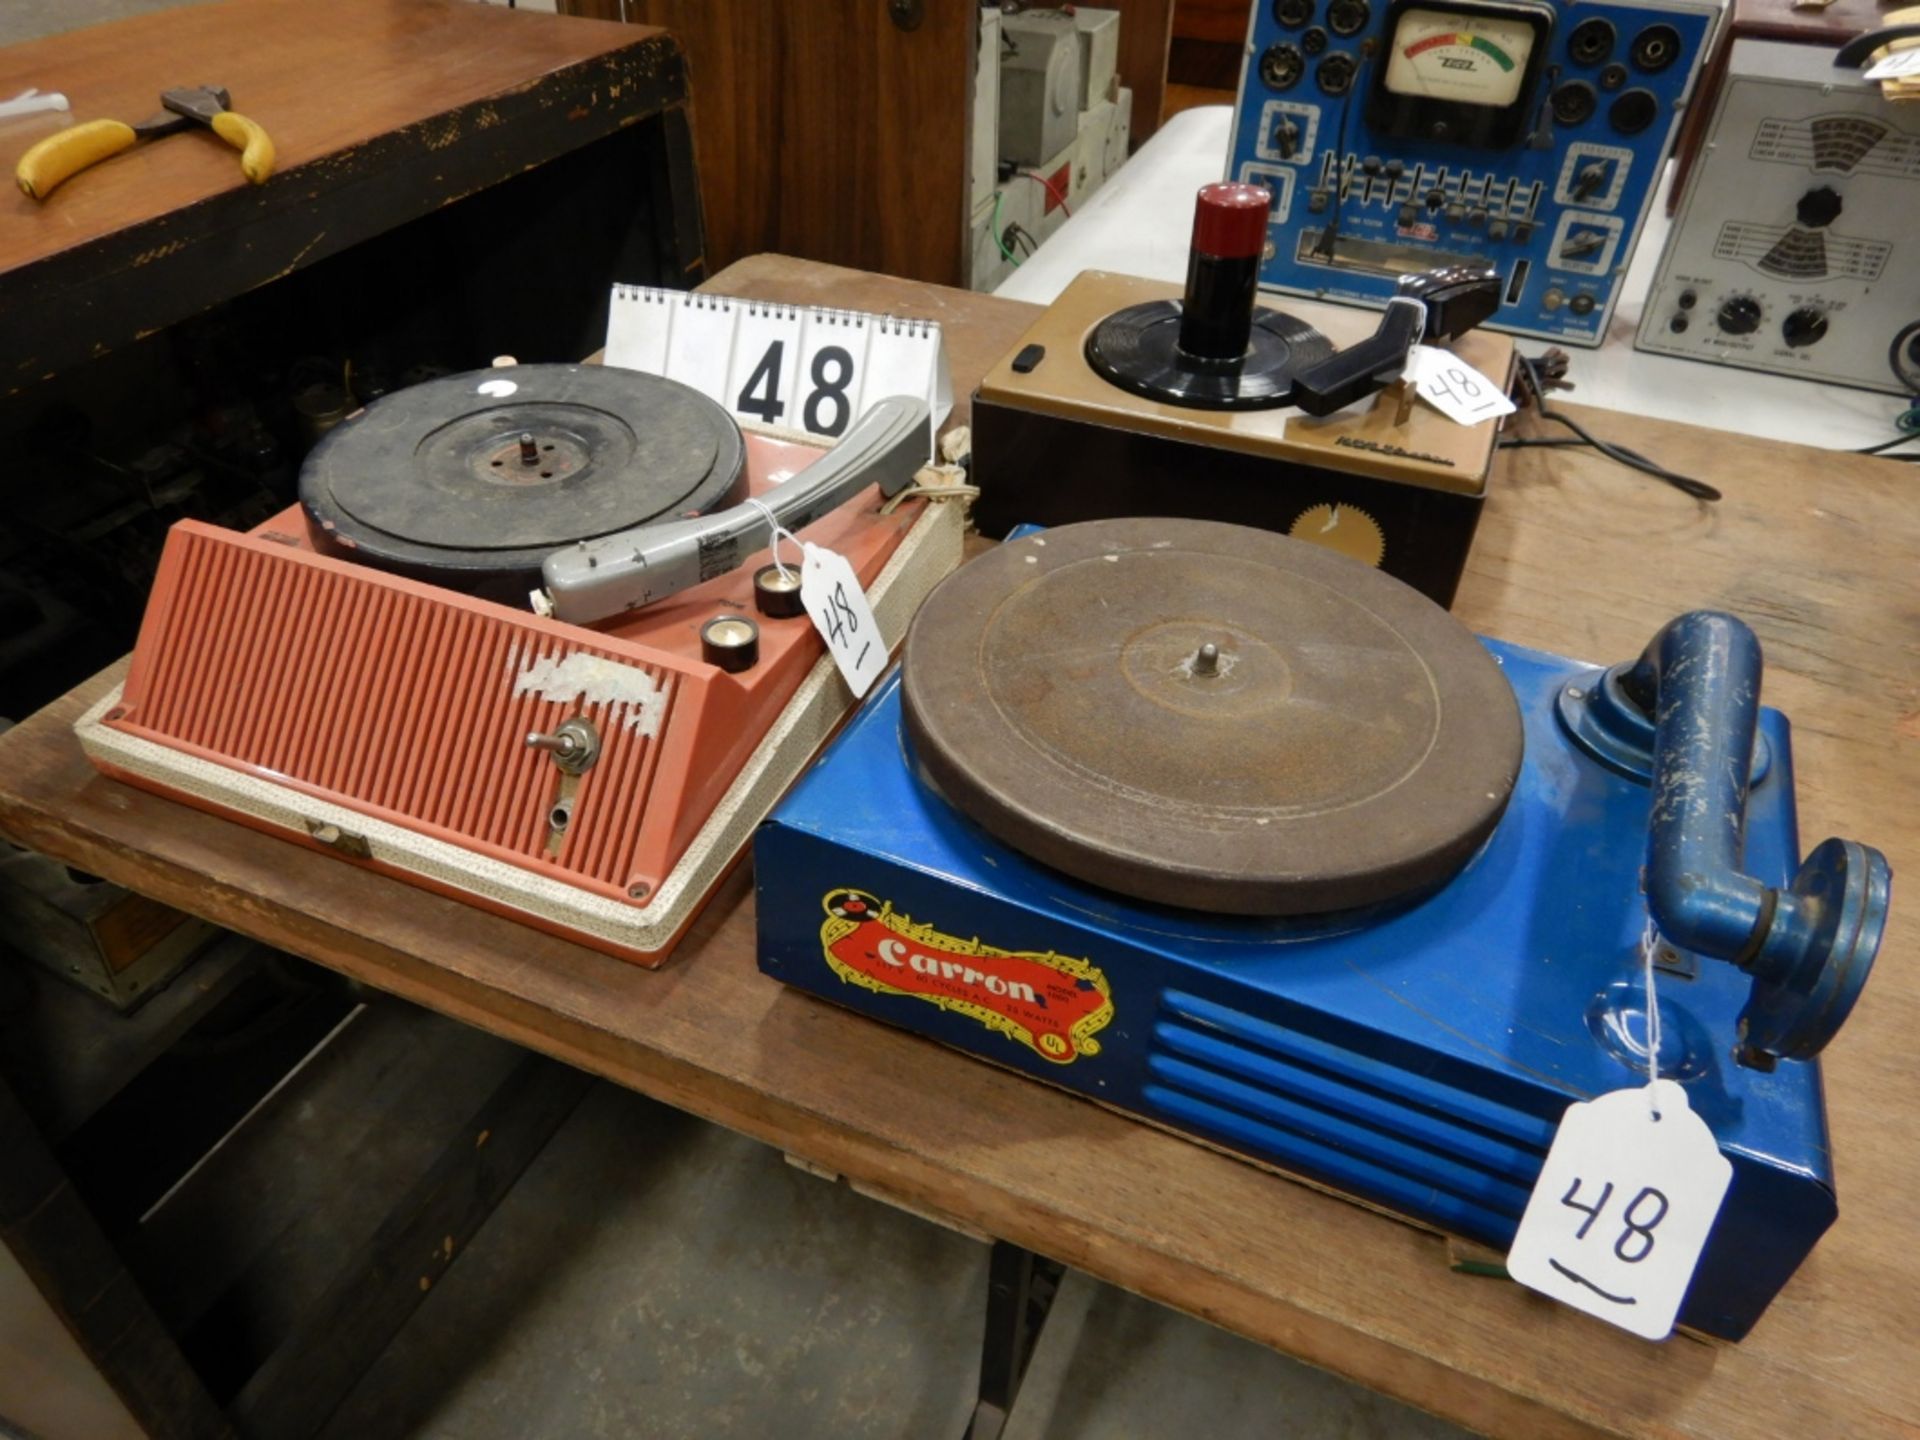 L/O TABLE TOP RECORD PLAYERS & PHONOGRAPH INCL. RCA RECORD PLAYER, CARRON PHONGRAPH, & TABLE TOP